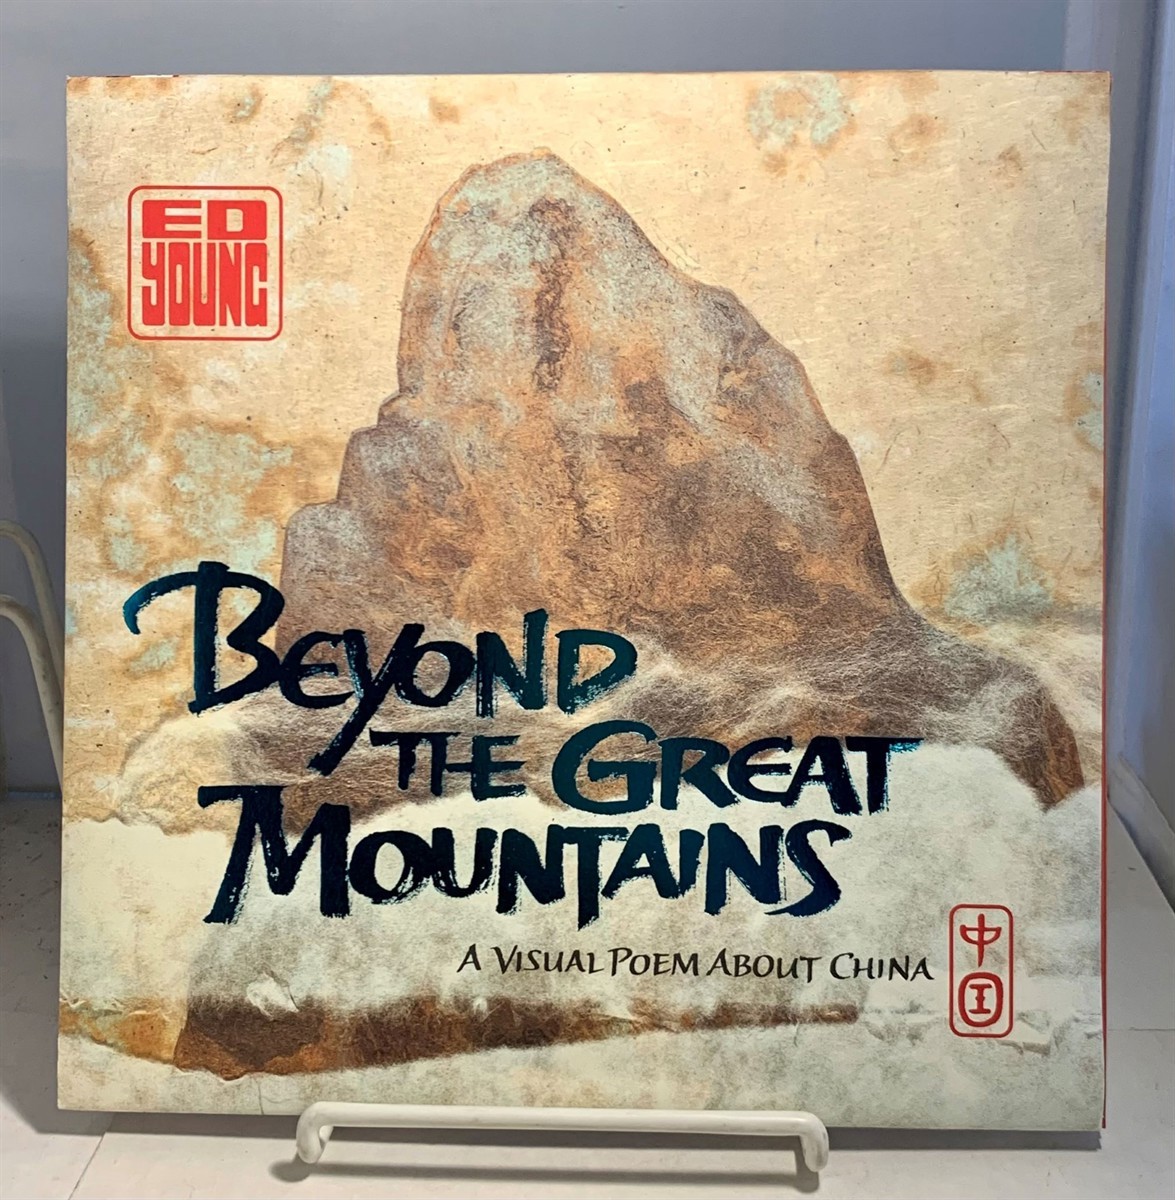 Great　Visual　Beyond　A　the　Mountains　China　Poem　about